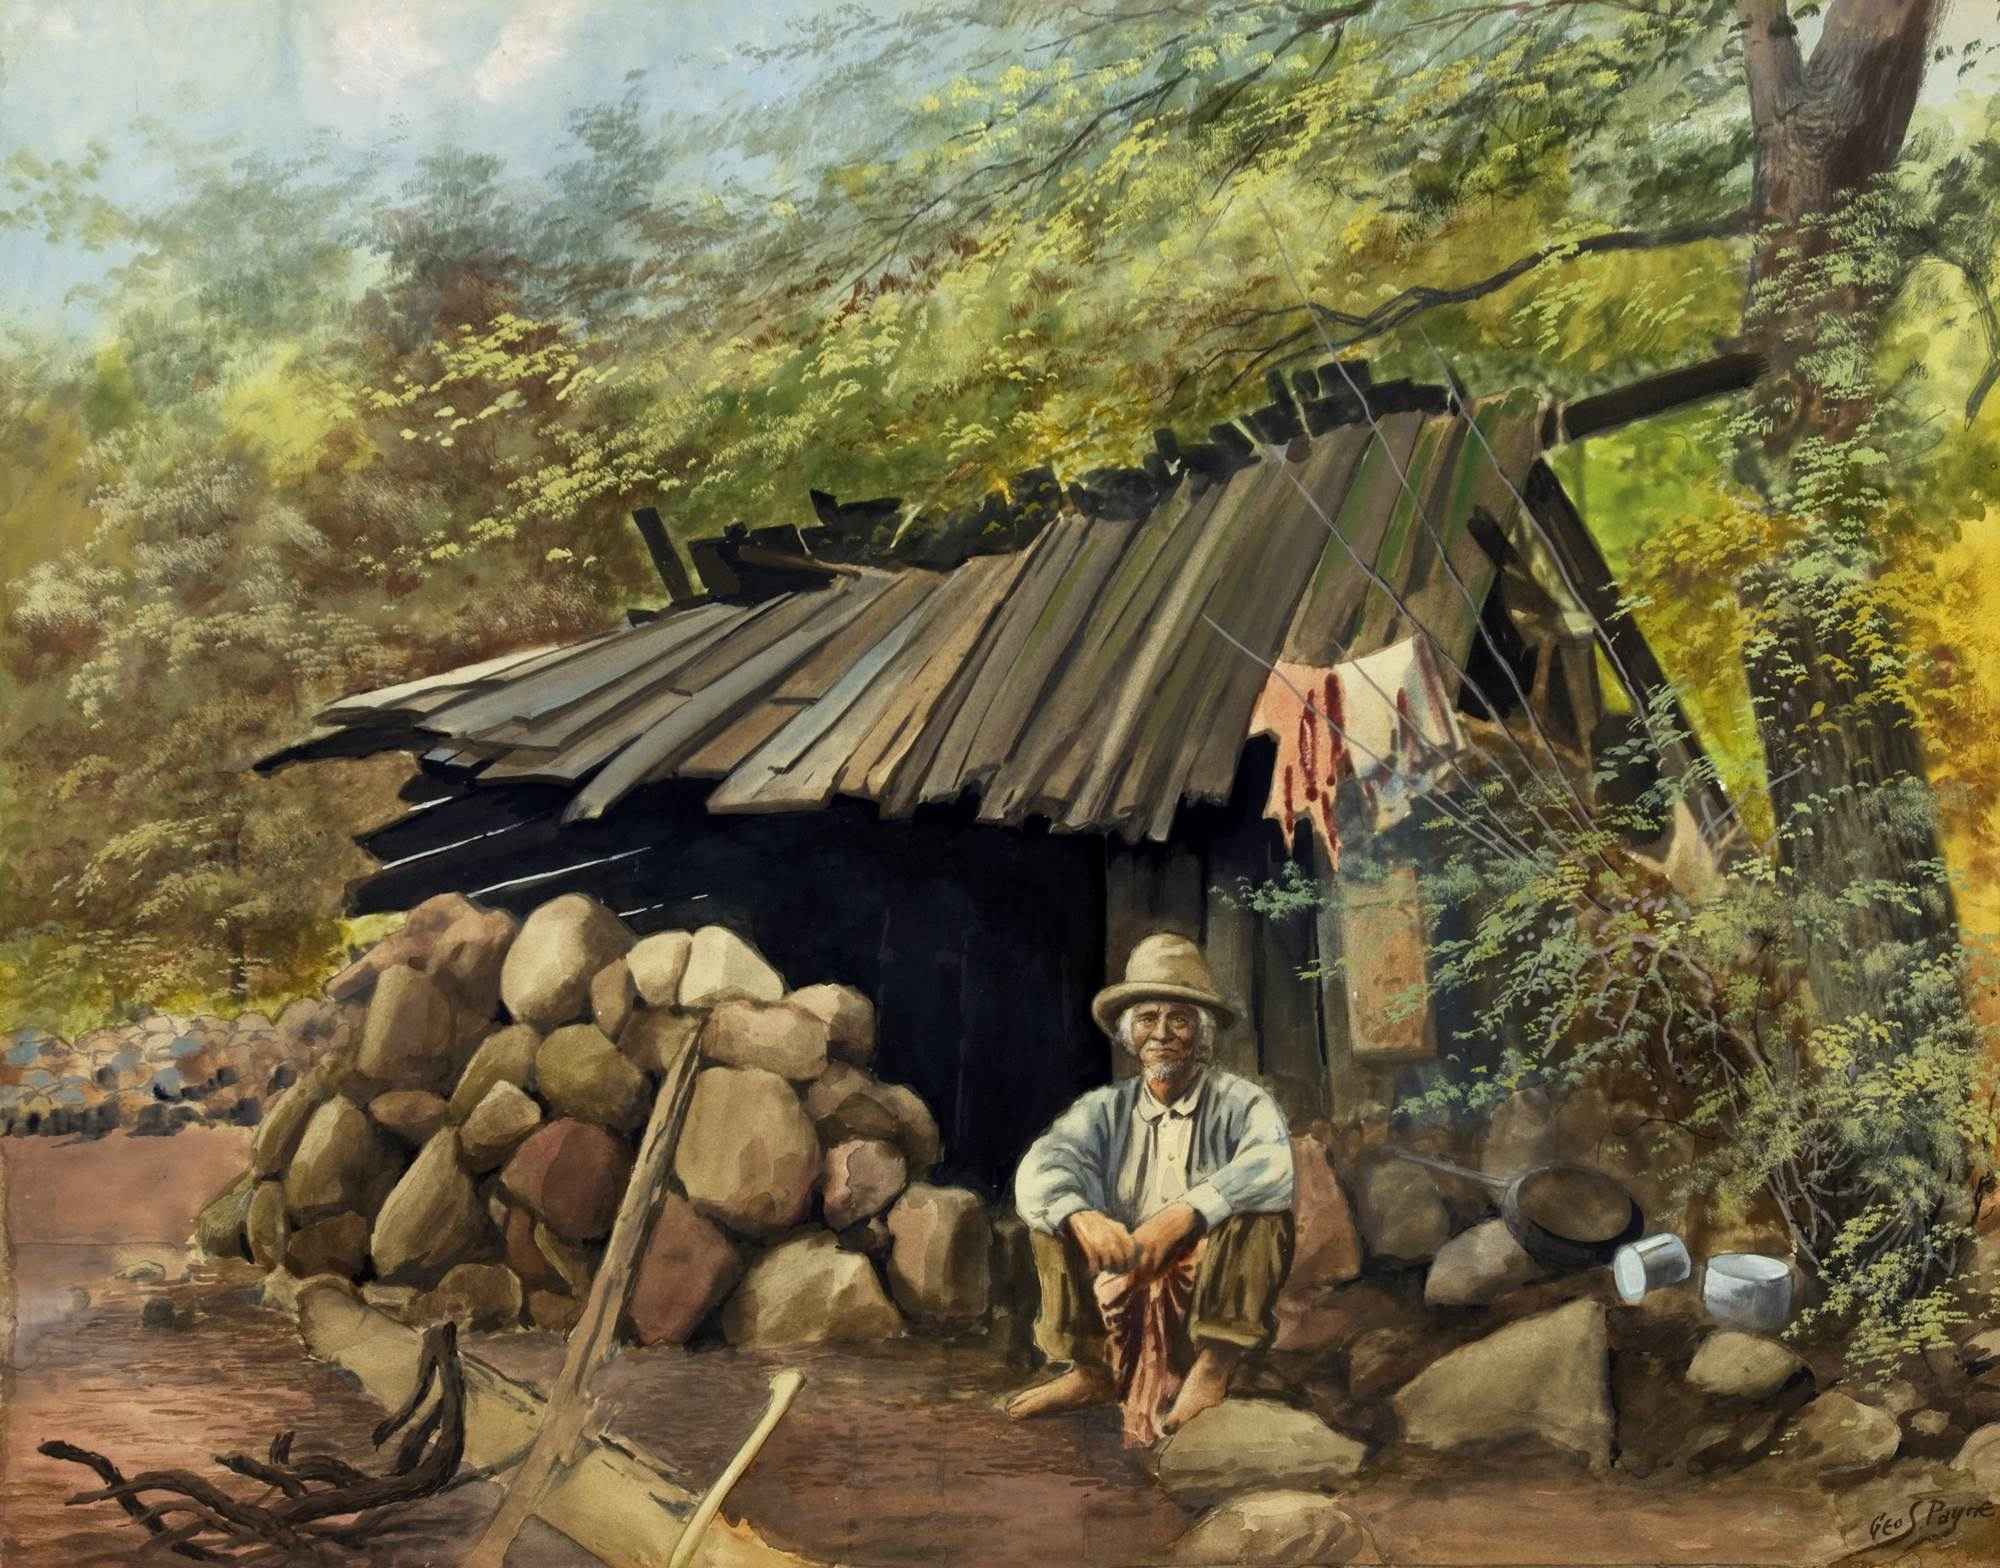 Painting Man Seated in Front of Wooden Shack